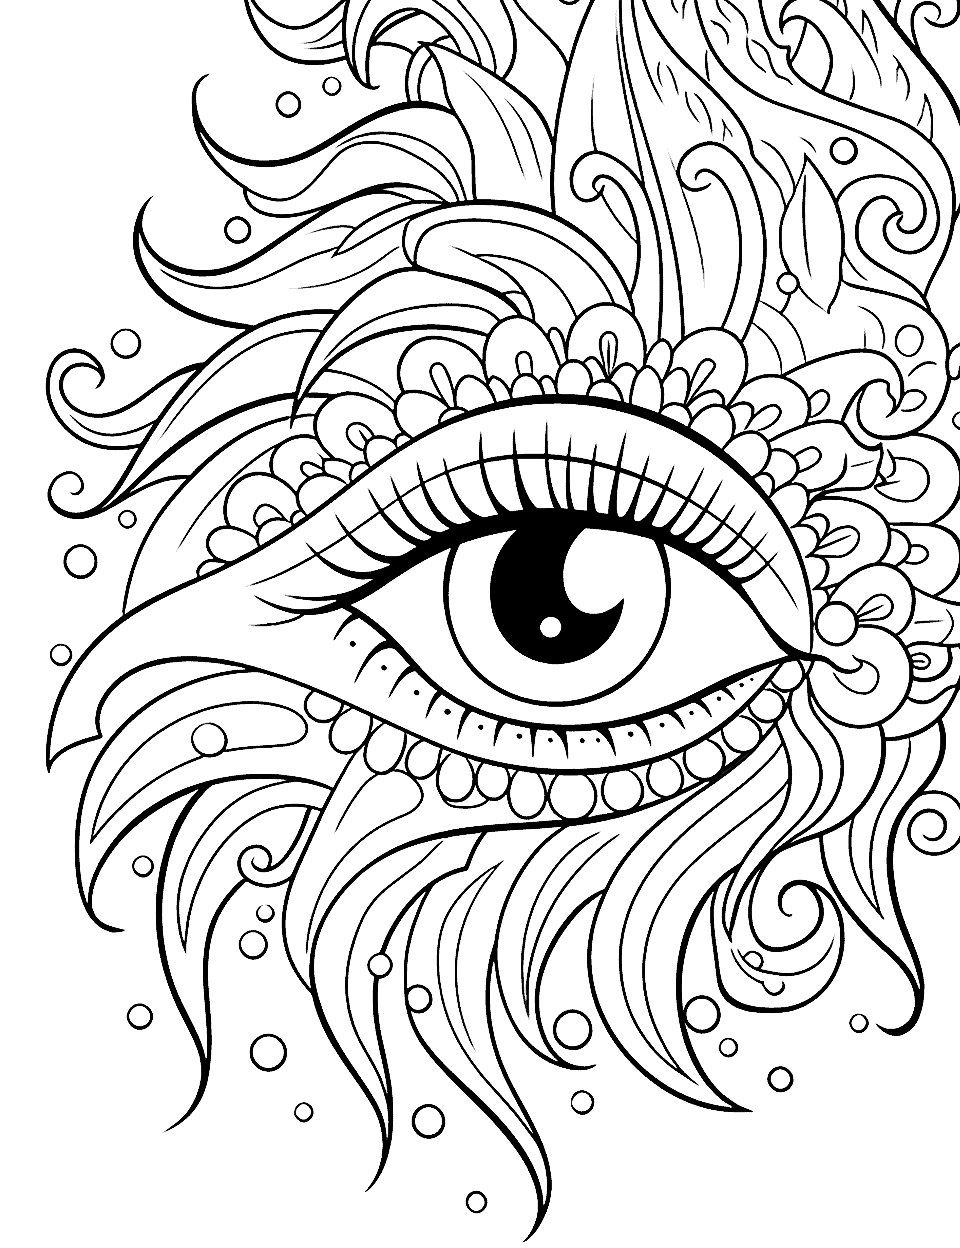 Eye of the Mystical Creature Adult Coloring Page - The eye of a mystical creature like a unicorn or phoenix.